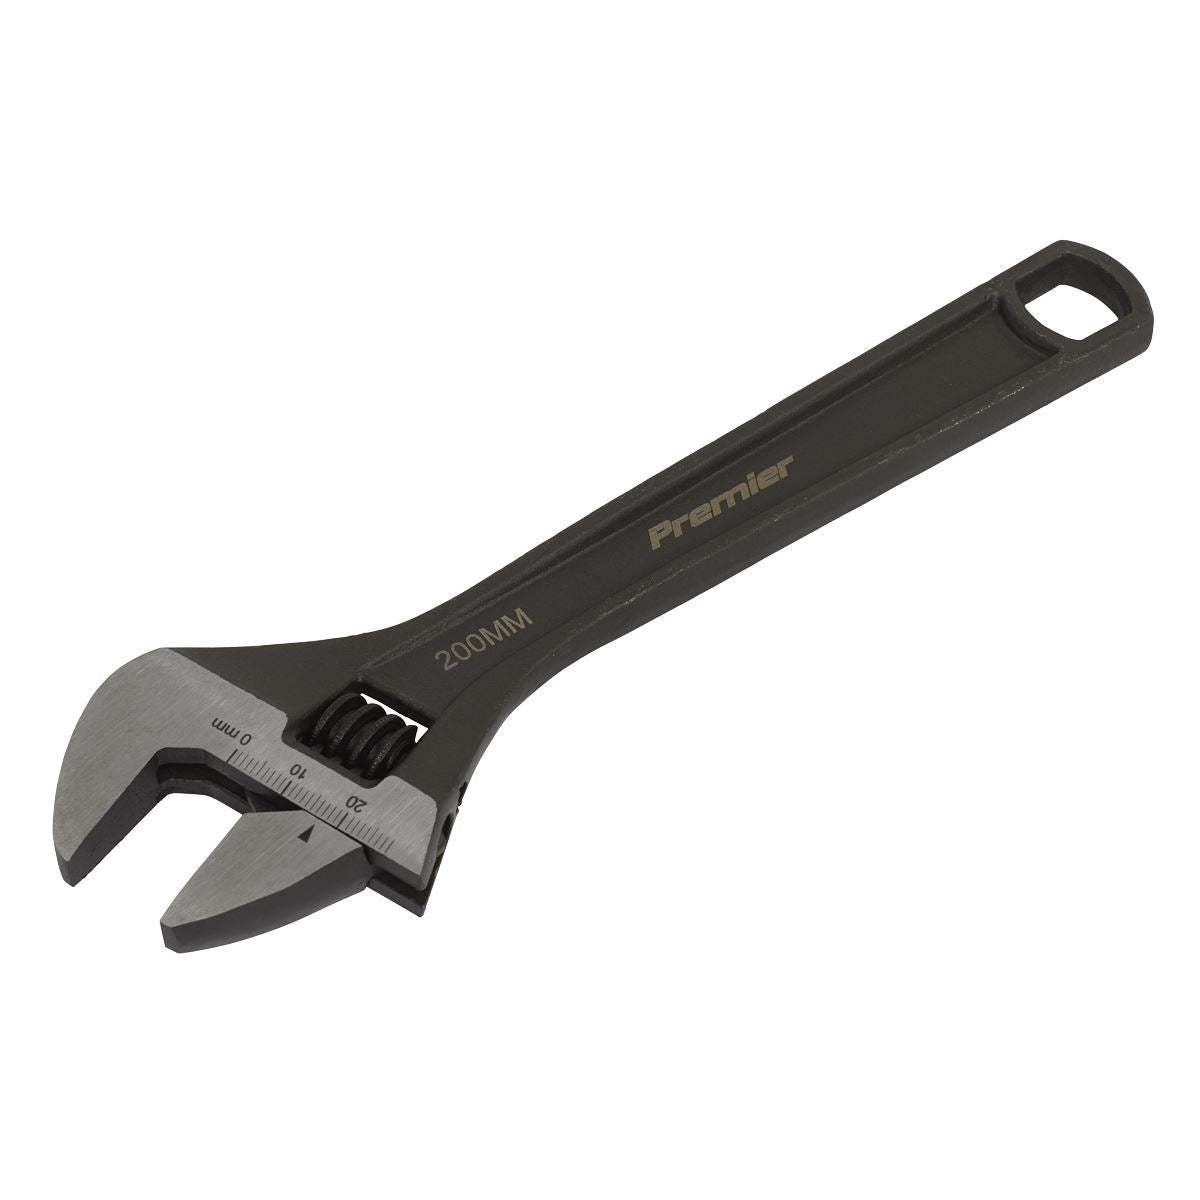 Sealey Premier Adjustable Wrench 200mm Jaw Capacity 24mm